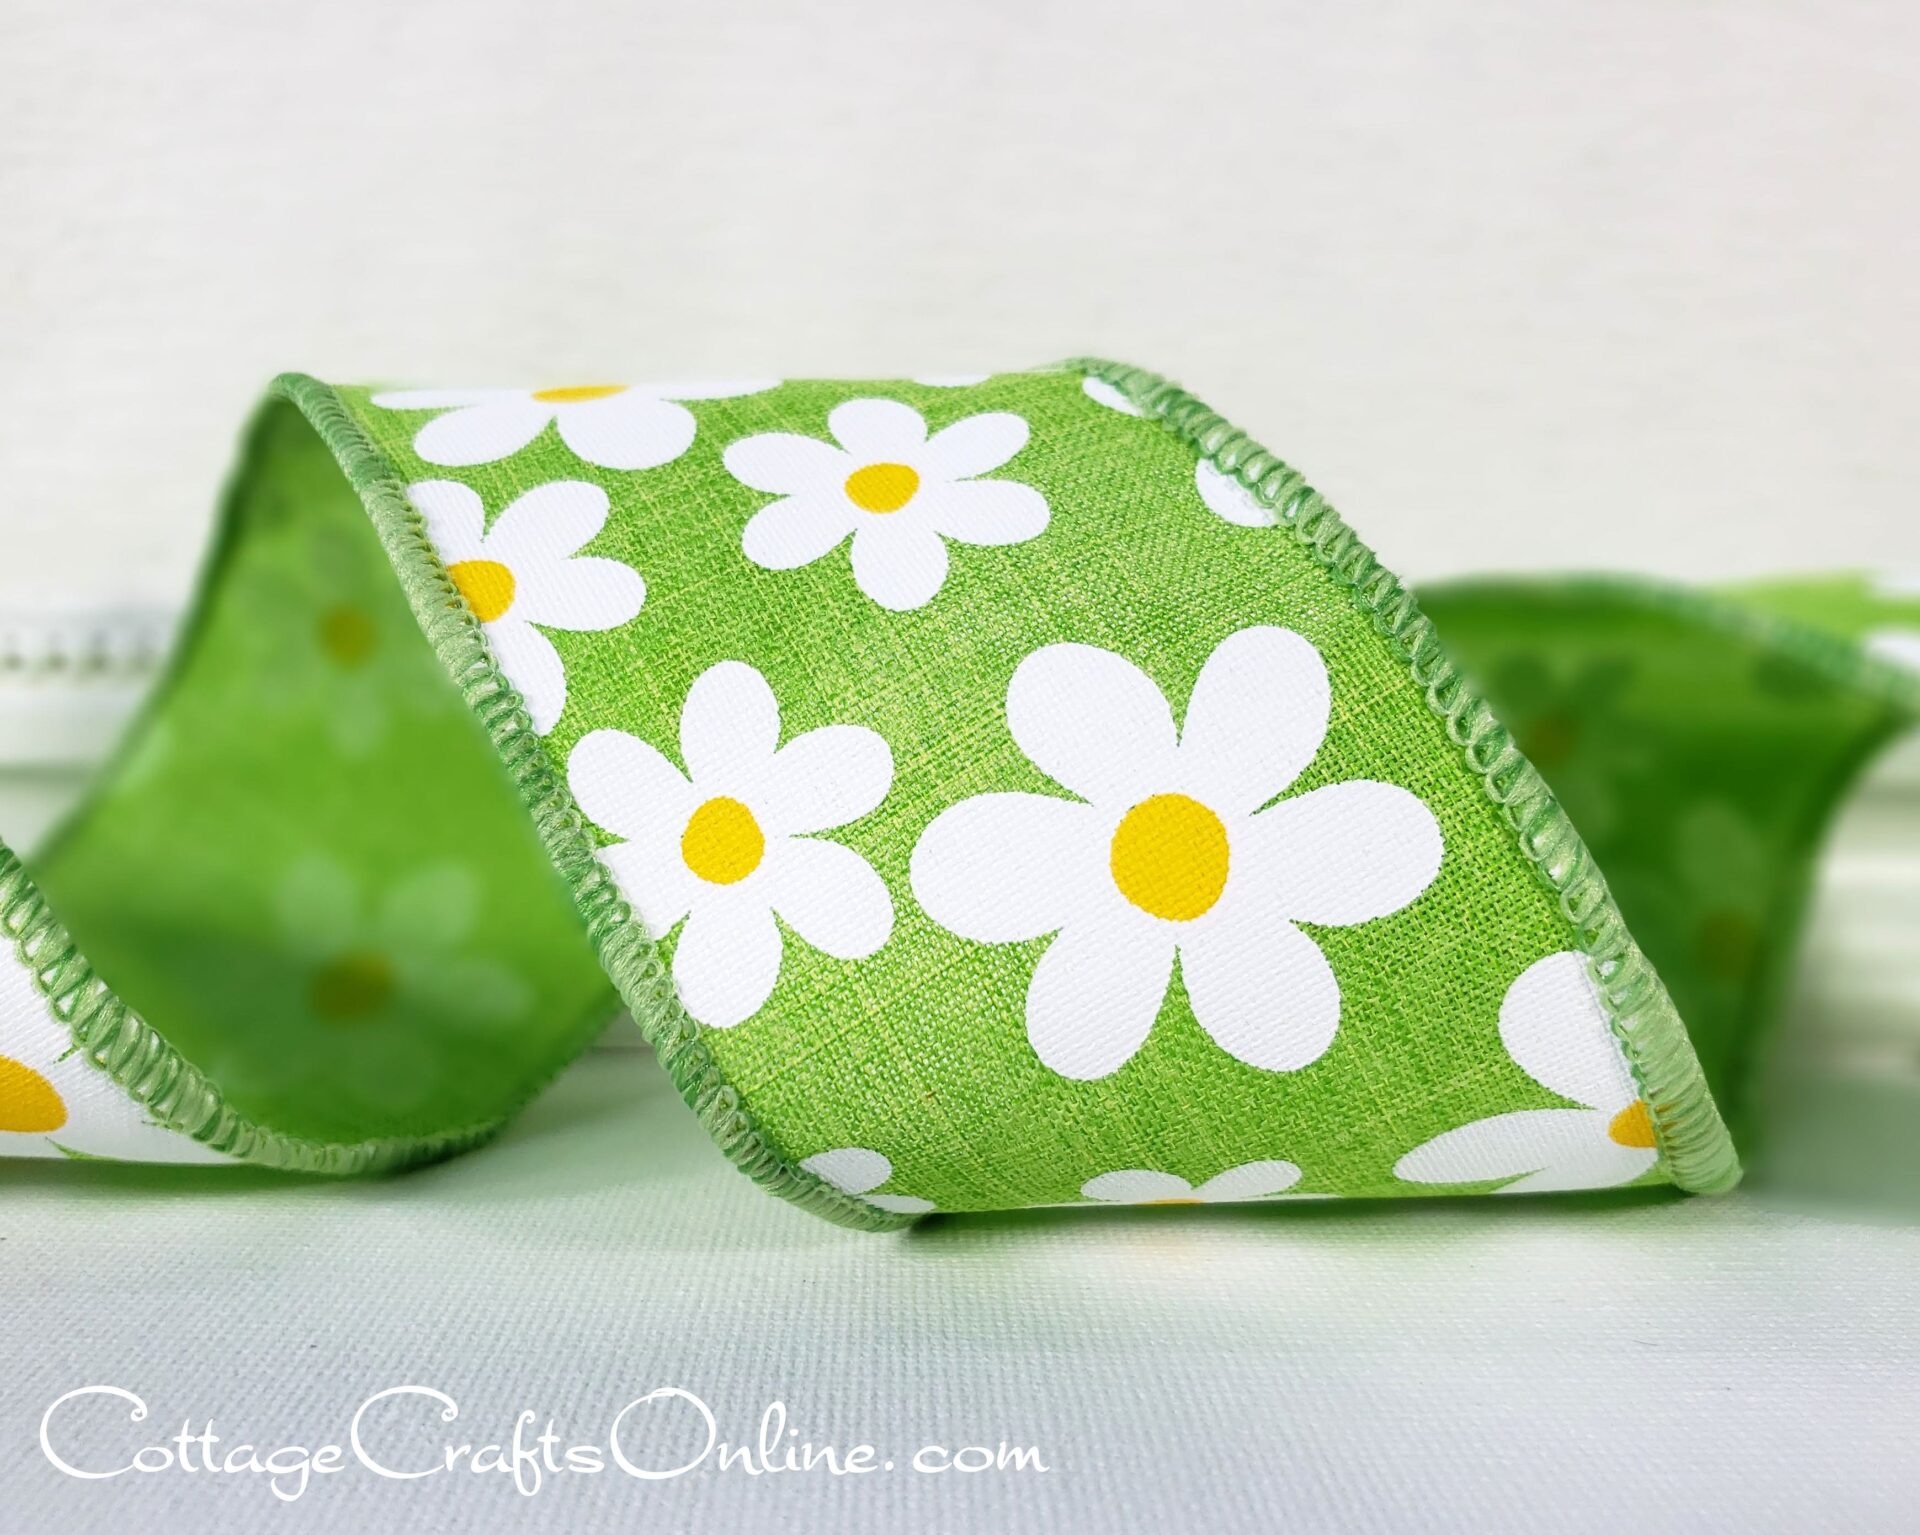 A green ribbon with white flowers on it.